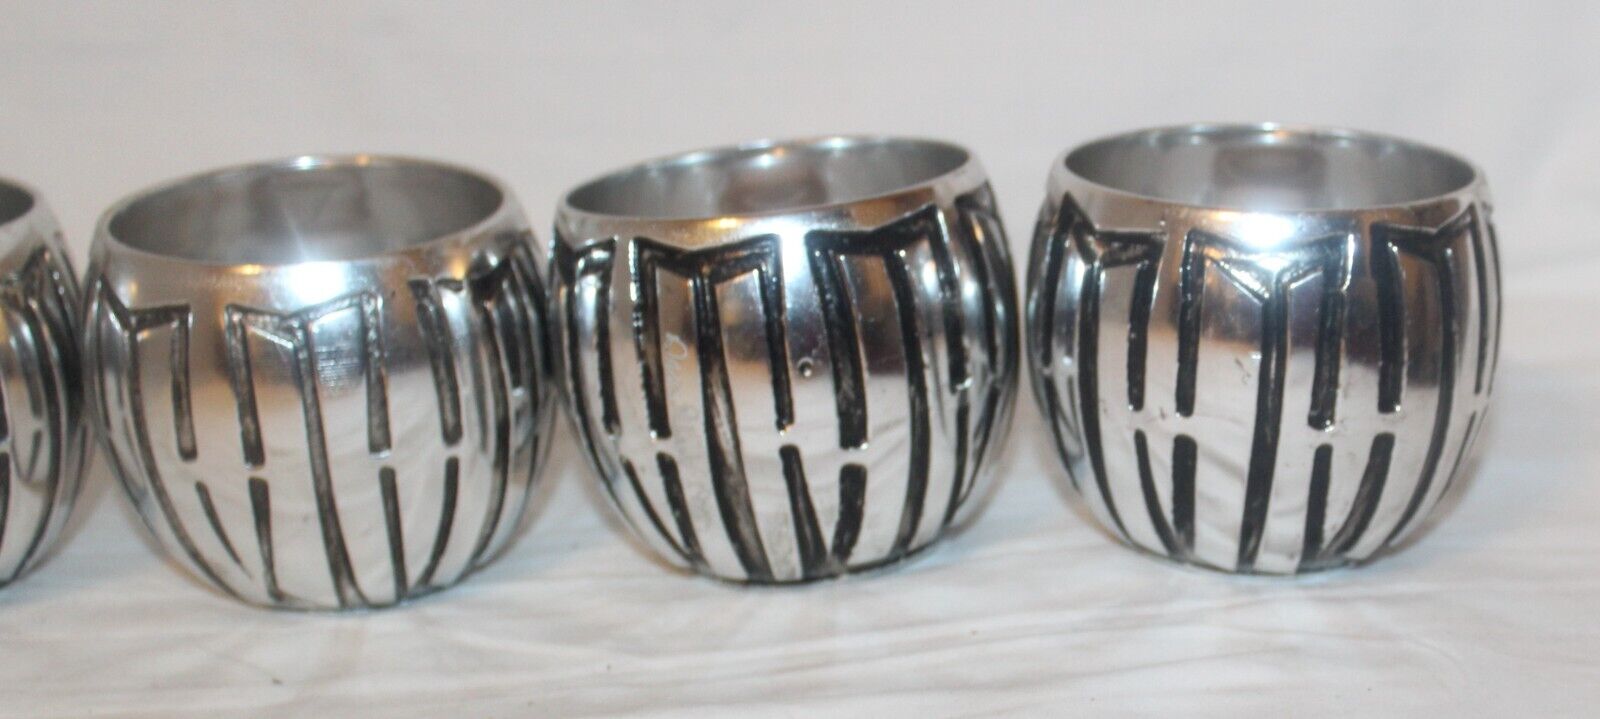 5 Don Sheil MCM Metal Cups Signed 1973 Mid Century Modern